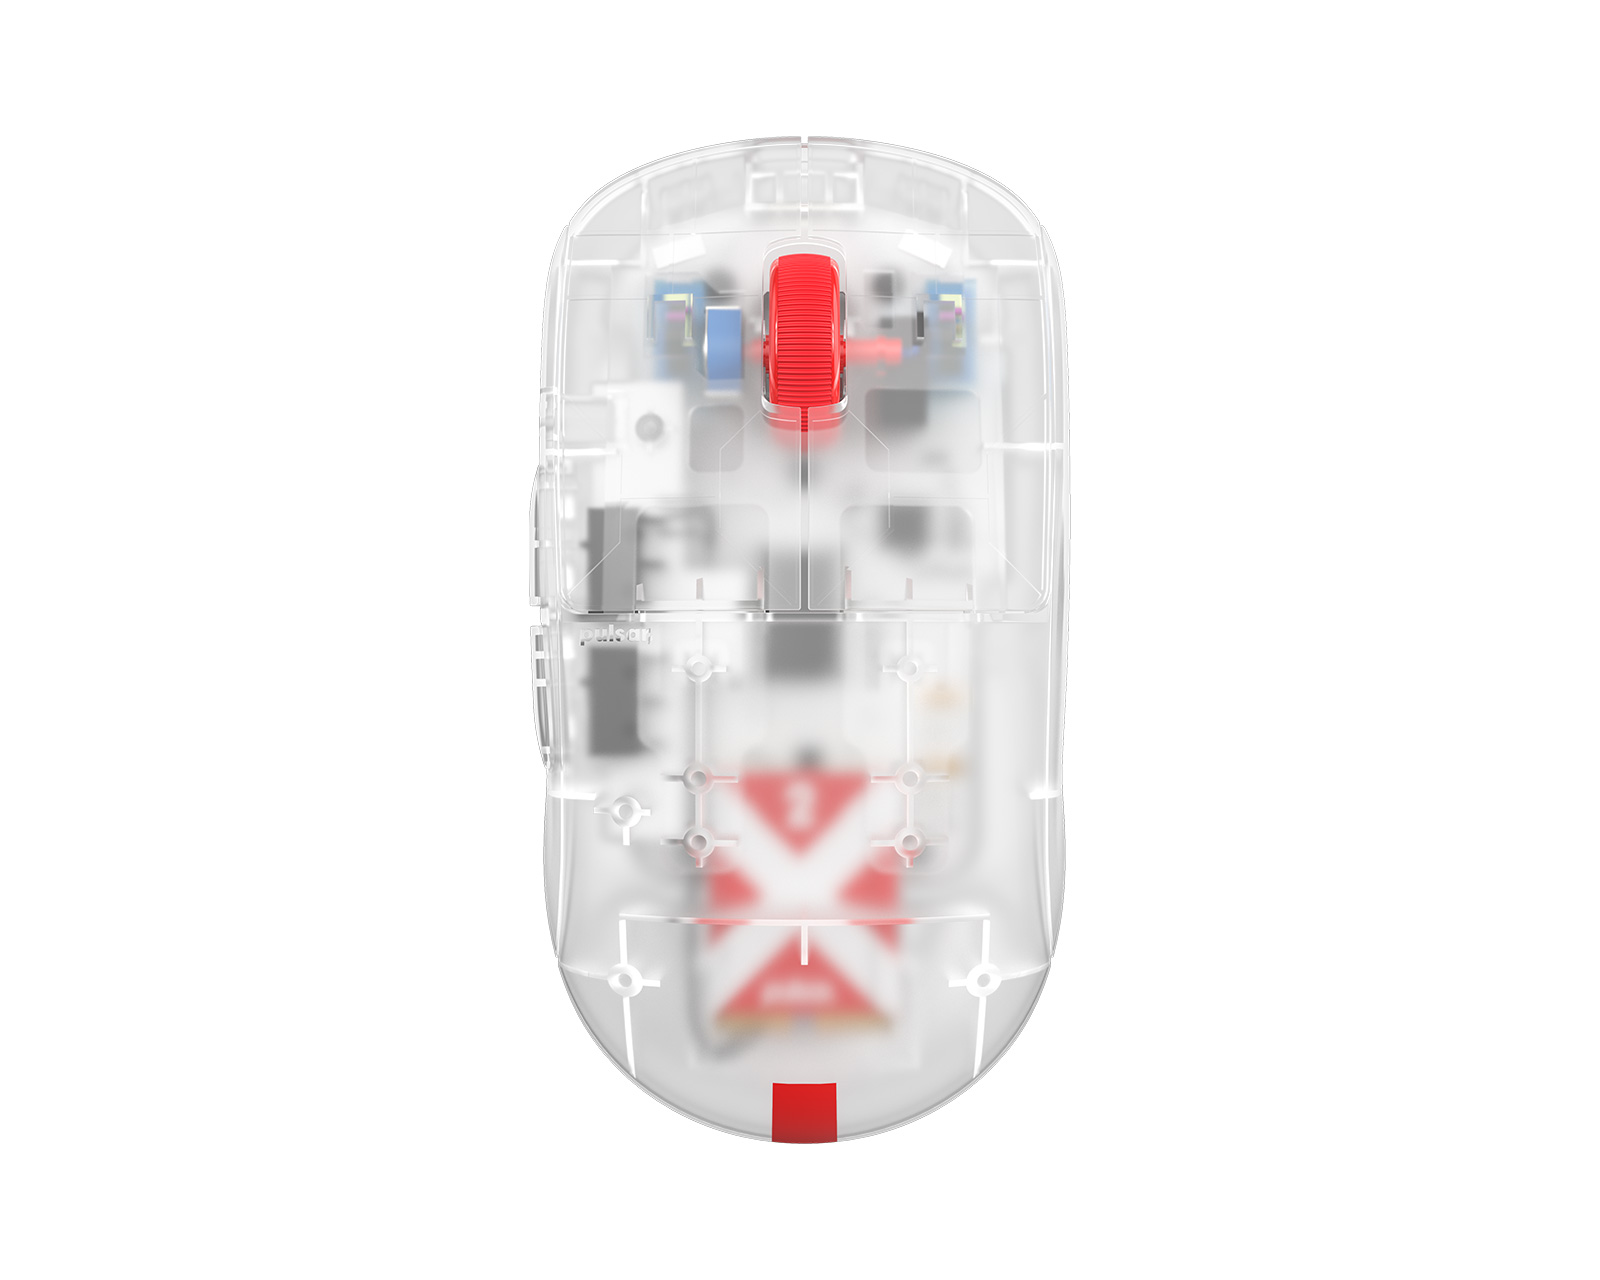 Pulsar X2 Wireless Gaming Mouse - Super Clear